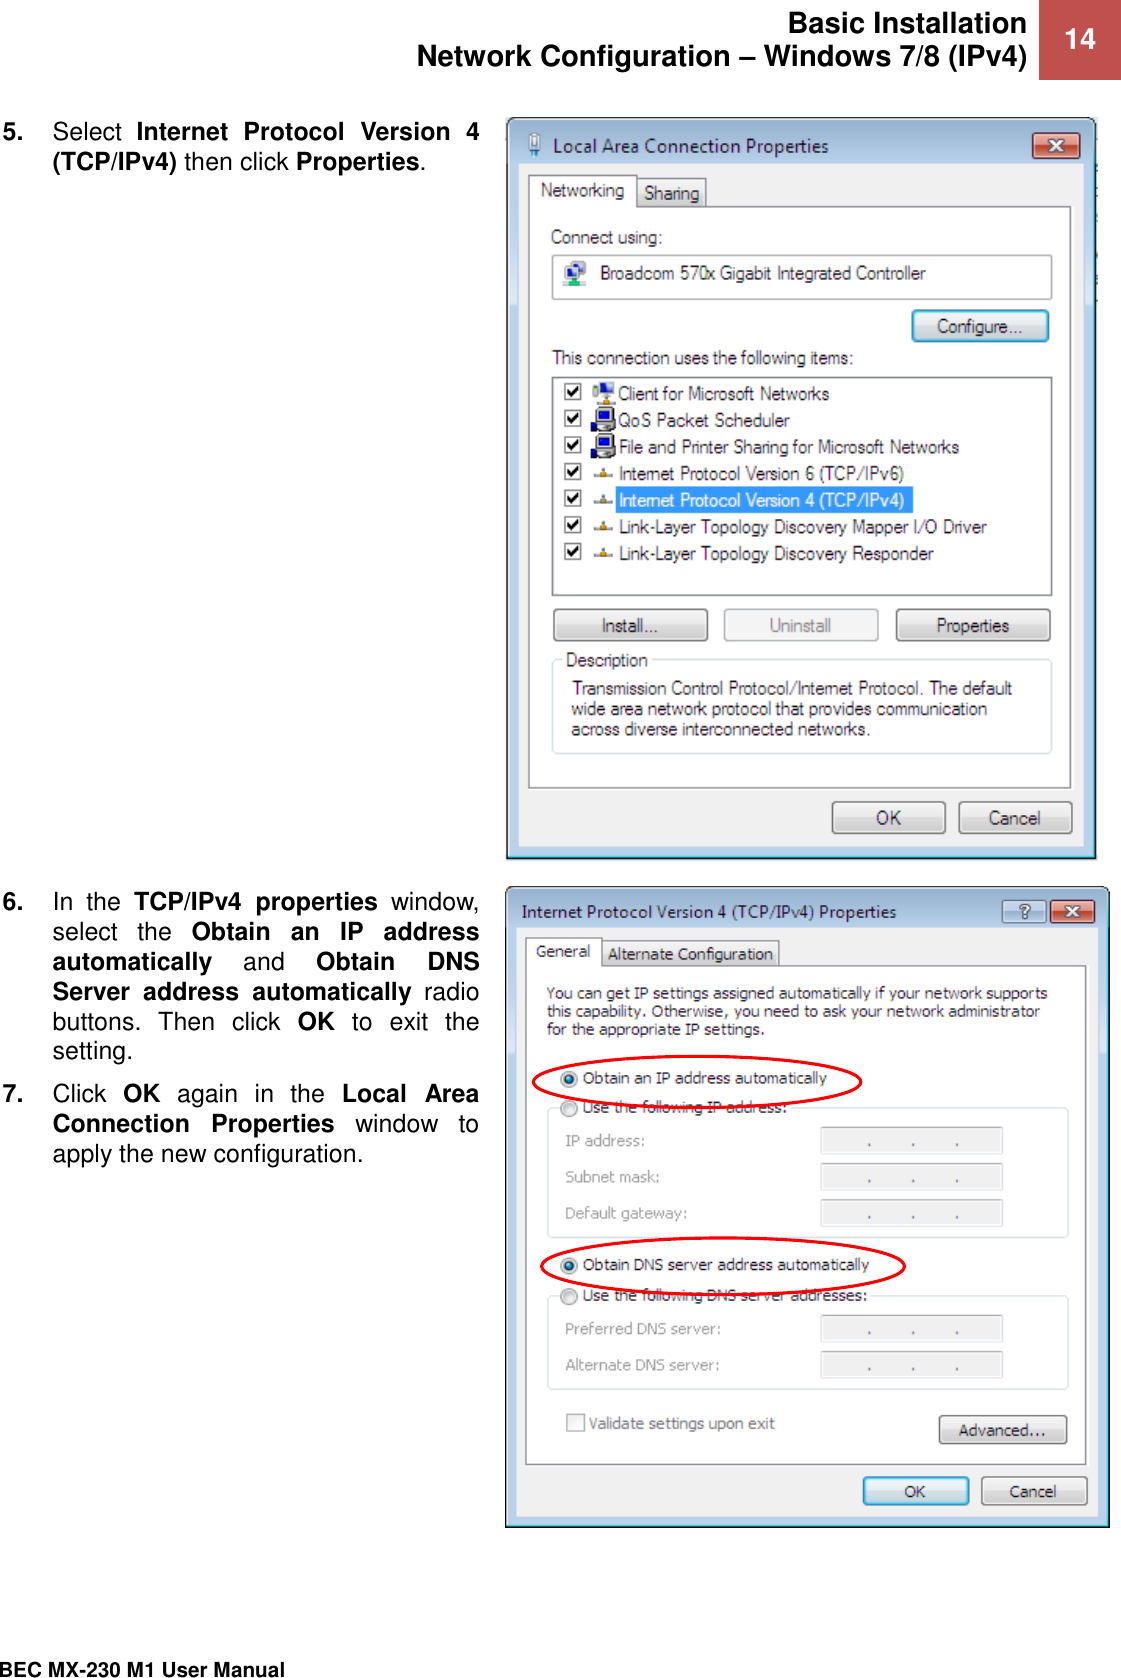 Basic Installation Network Configuration – Windows 7/8 (IPv4) 14   BEC MX-230 M1 User Manual  5. Select  Internet  Protocol  Version  4 (TCP/IPv4) then click Properties.   6. In  the  TCP/IPv4  properties  window, select  the  Obtain  an  IP  address automatically and  Obtain  DNS Server  address  automatically  radio buttons.  Then  click  OK  to  exit  the setting. 7. Click  OK  again  in  the  Local  Area Connection  Properties  window  to apply the new configuration.   